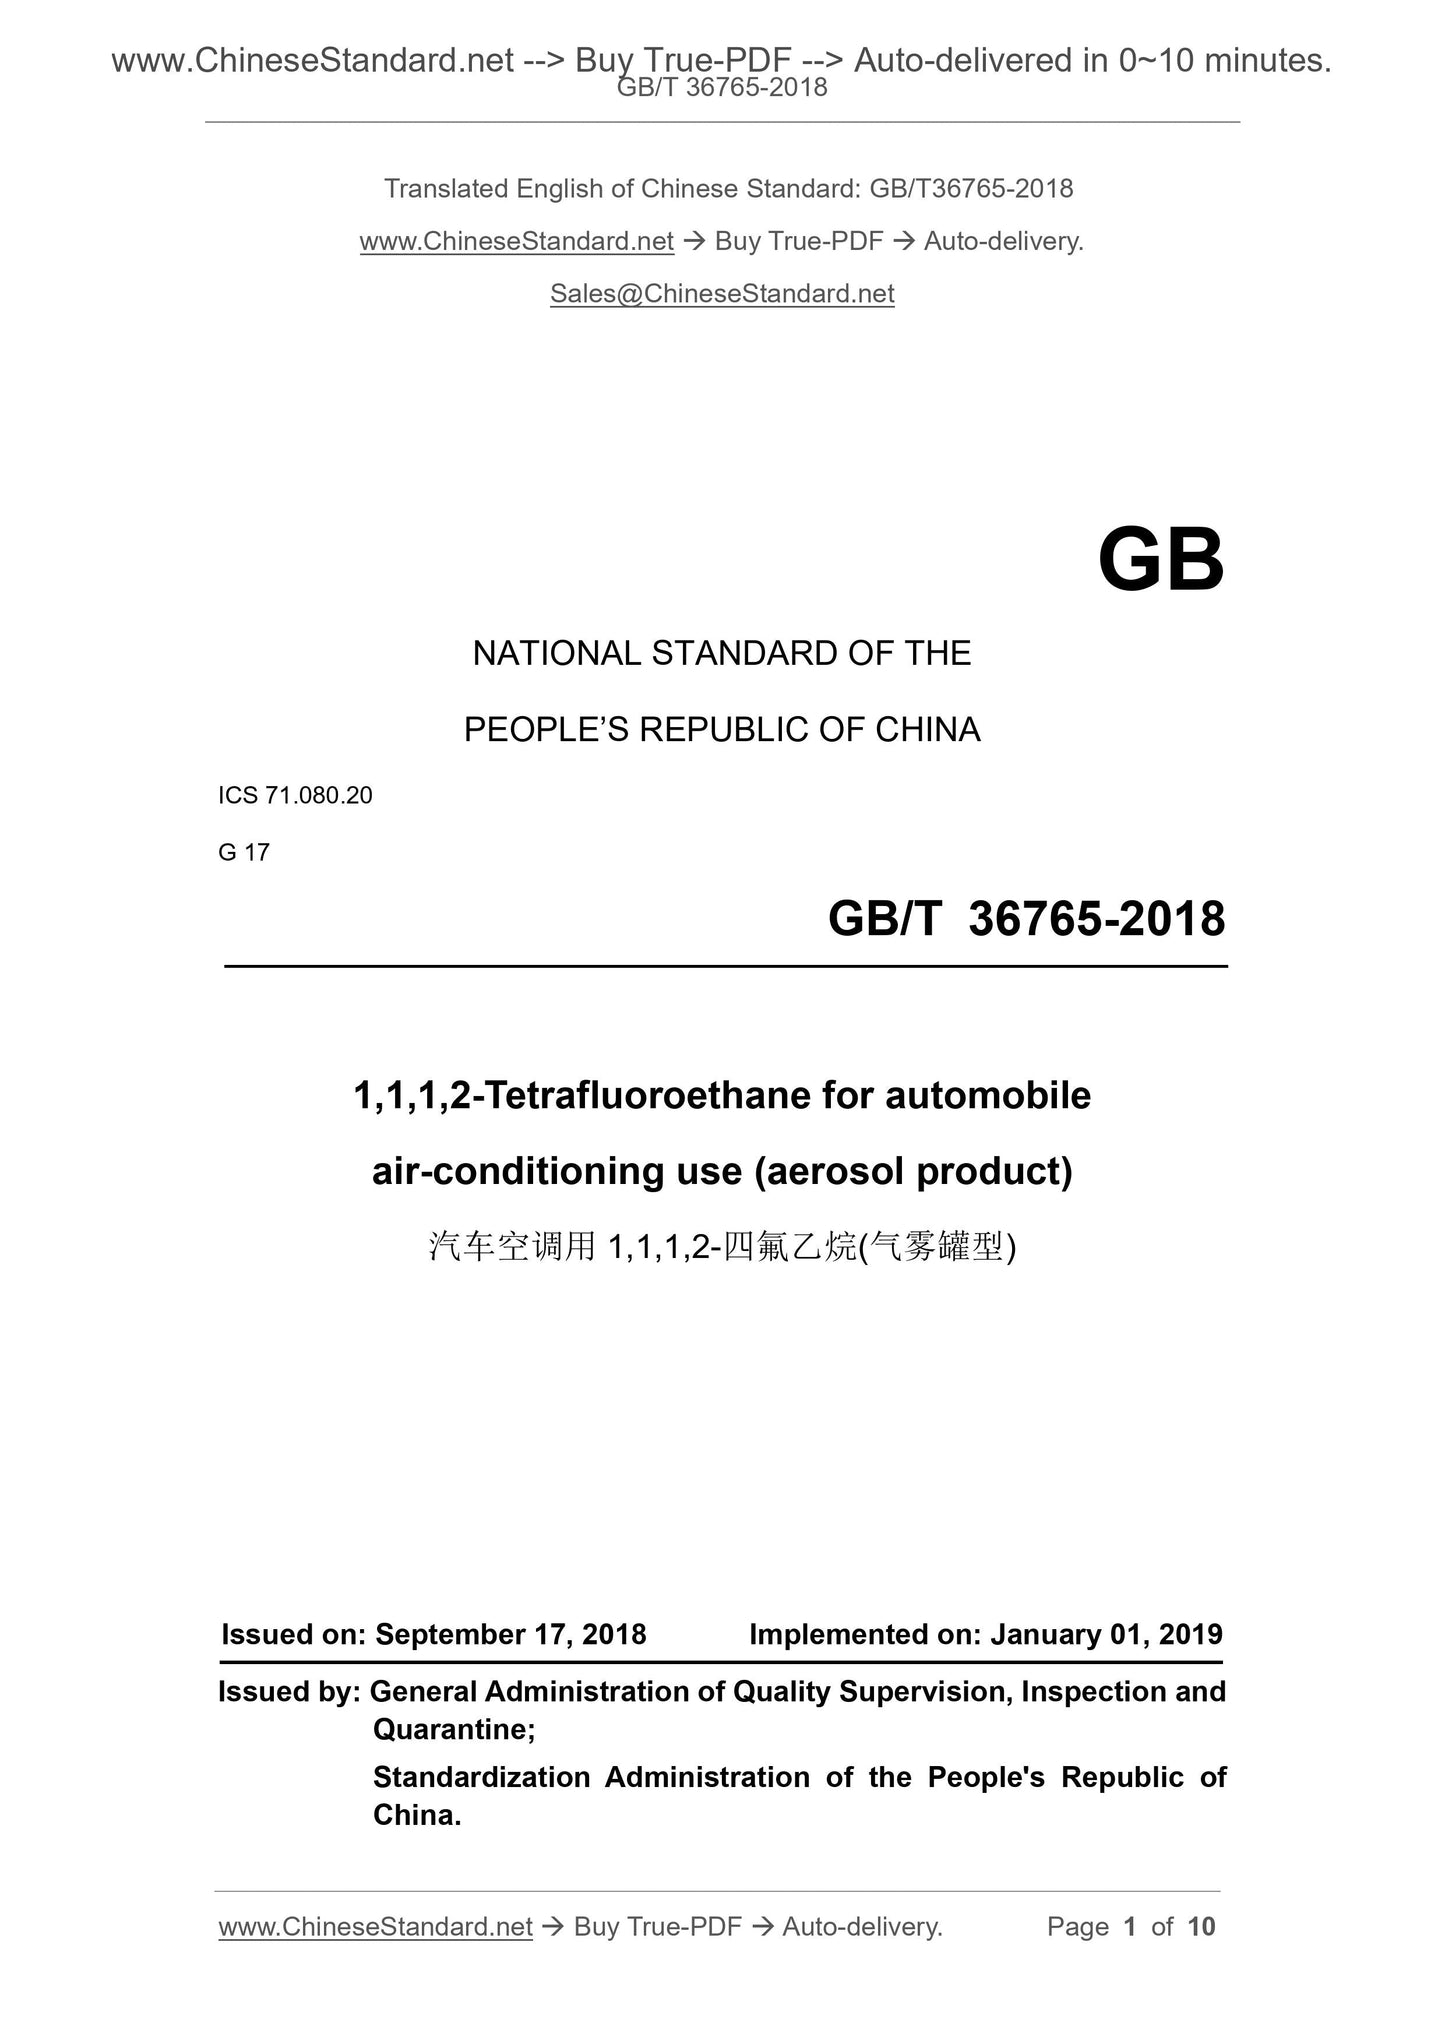 GB/T 36765-2018 Page 1